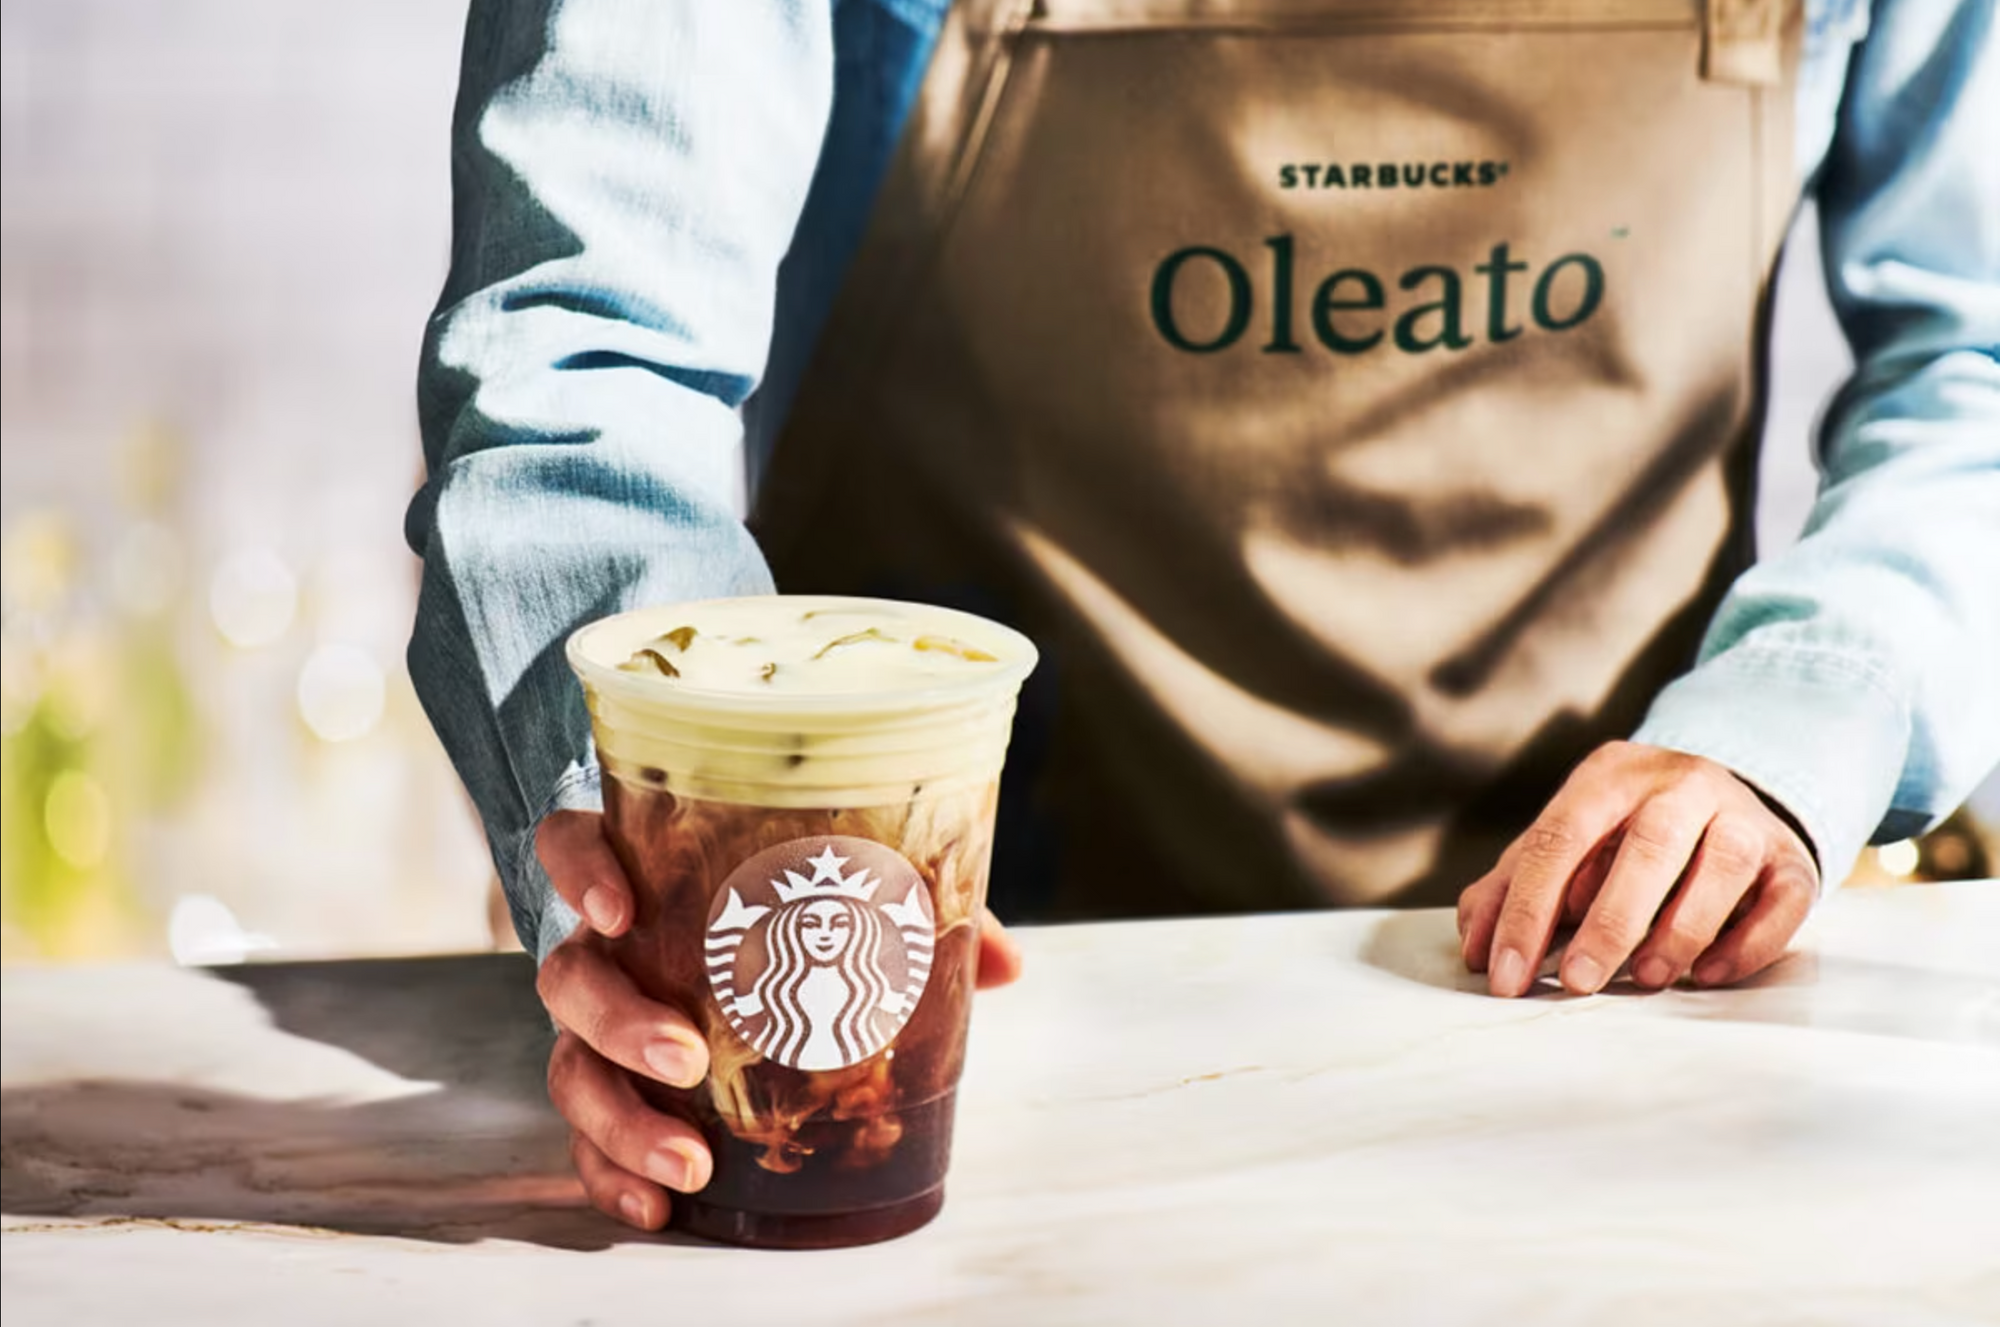 Coffee Meets Olive Oil: The story behind Oleato Made with Partanna